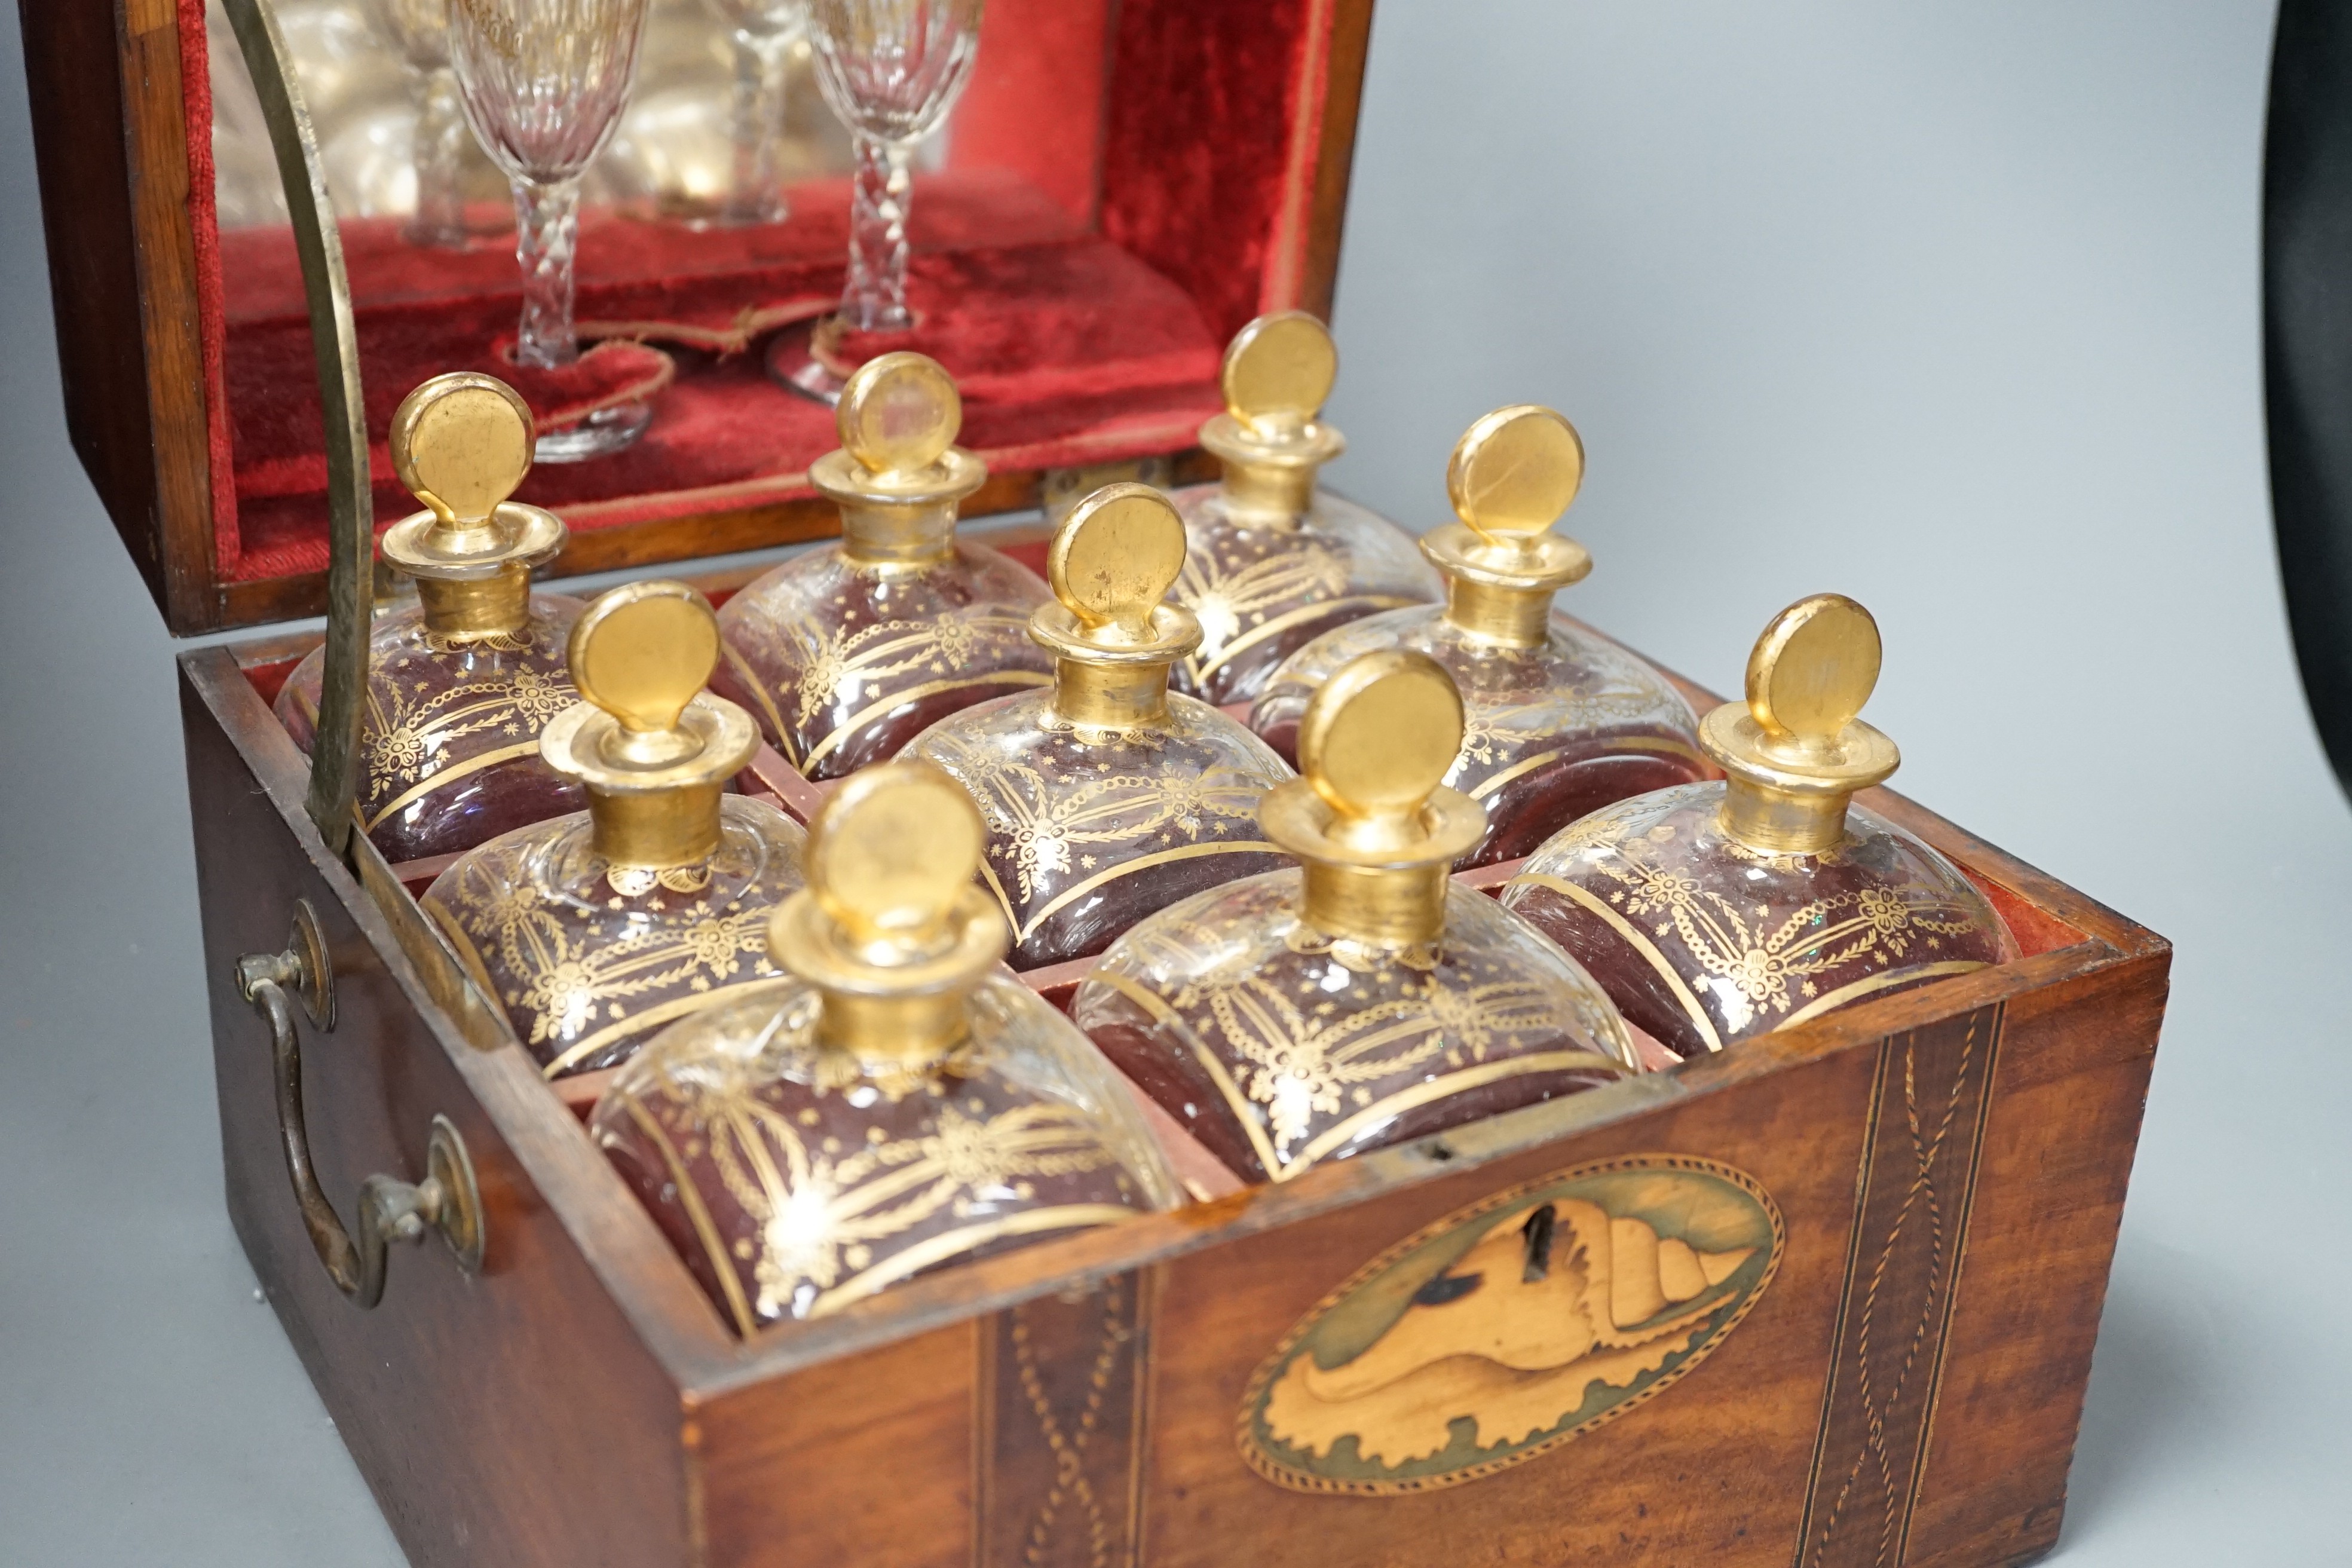 A 19th century Dutch inlaid mahogany decanter box containing nine gilt glass decanters and two glasses, 27cm